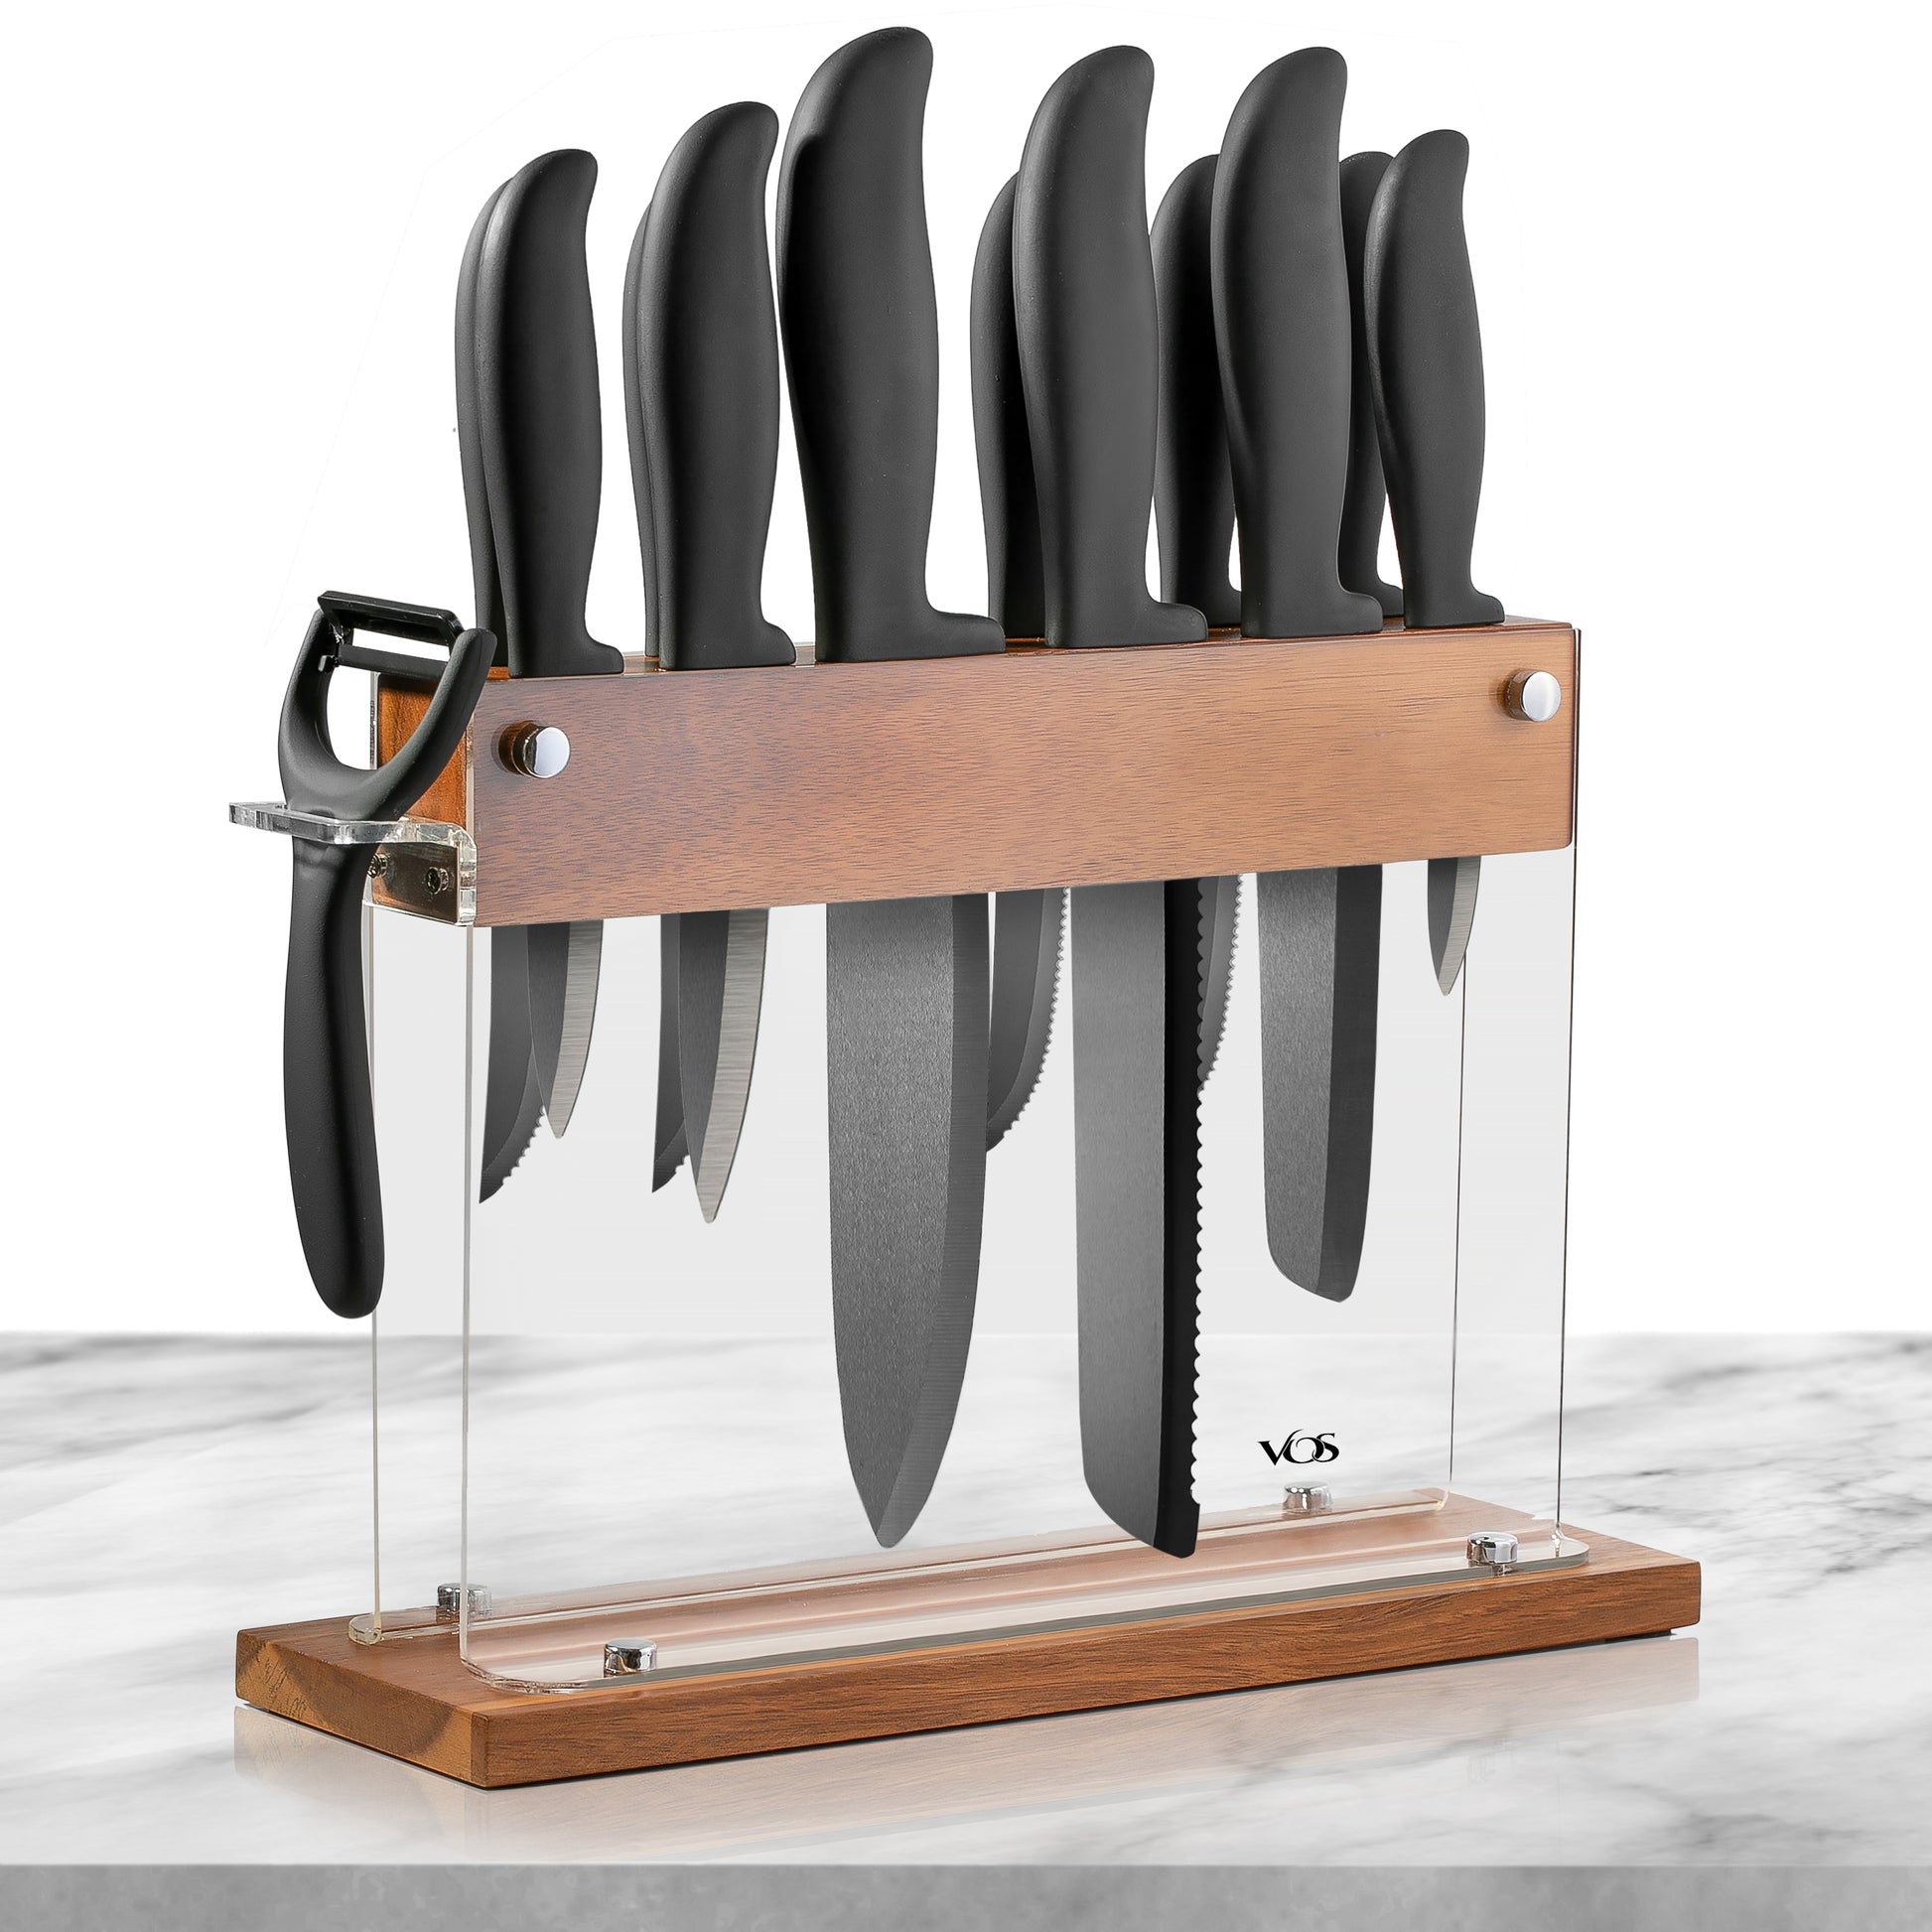 Vos Ceramic Knives With Covers 6 Pcs Kitchen Knife Set - 8 Bread